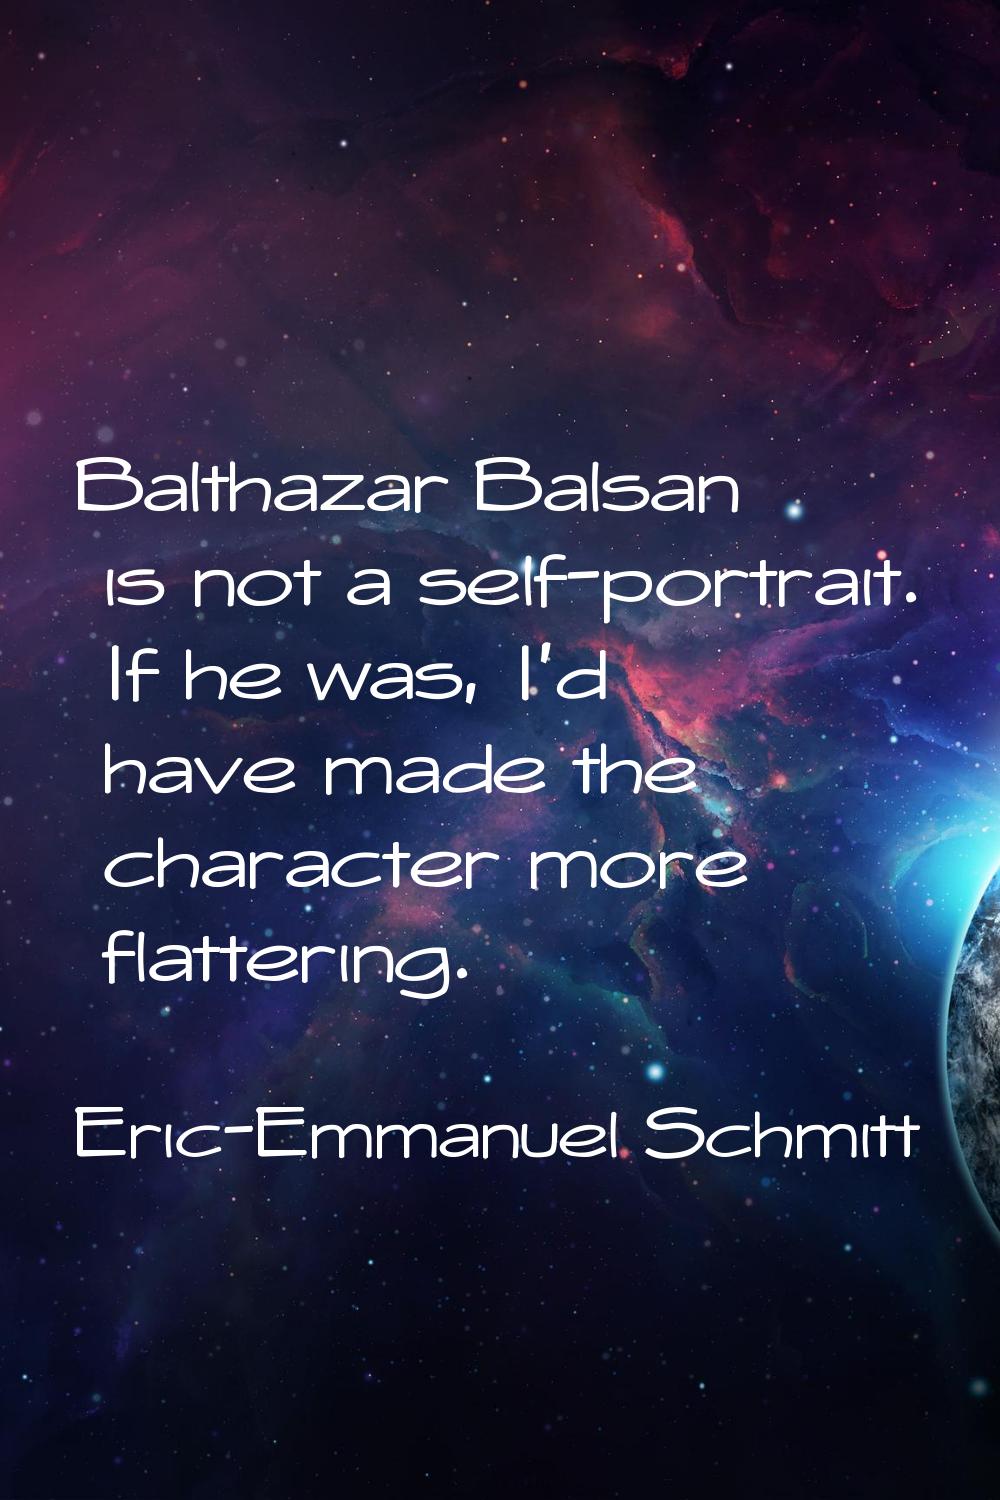 Balthazar Balsan is not a self-portrait. If he was, I'd have made the character more flattering.